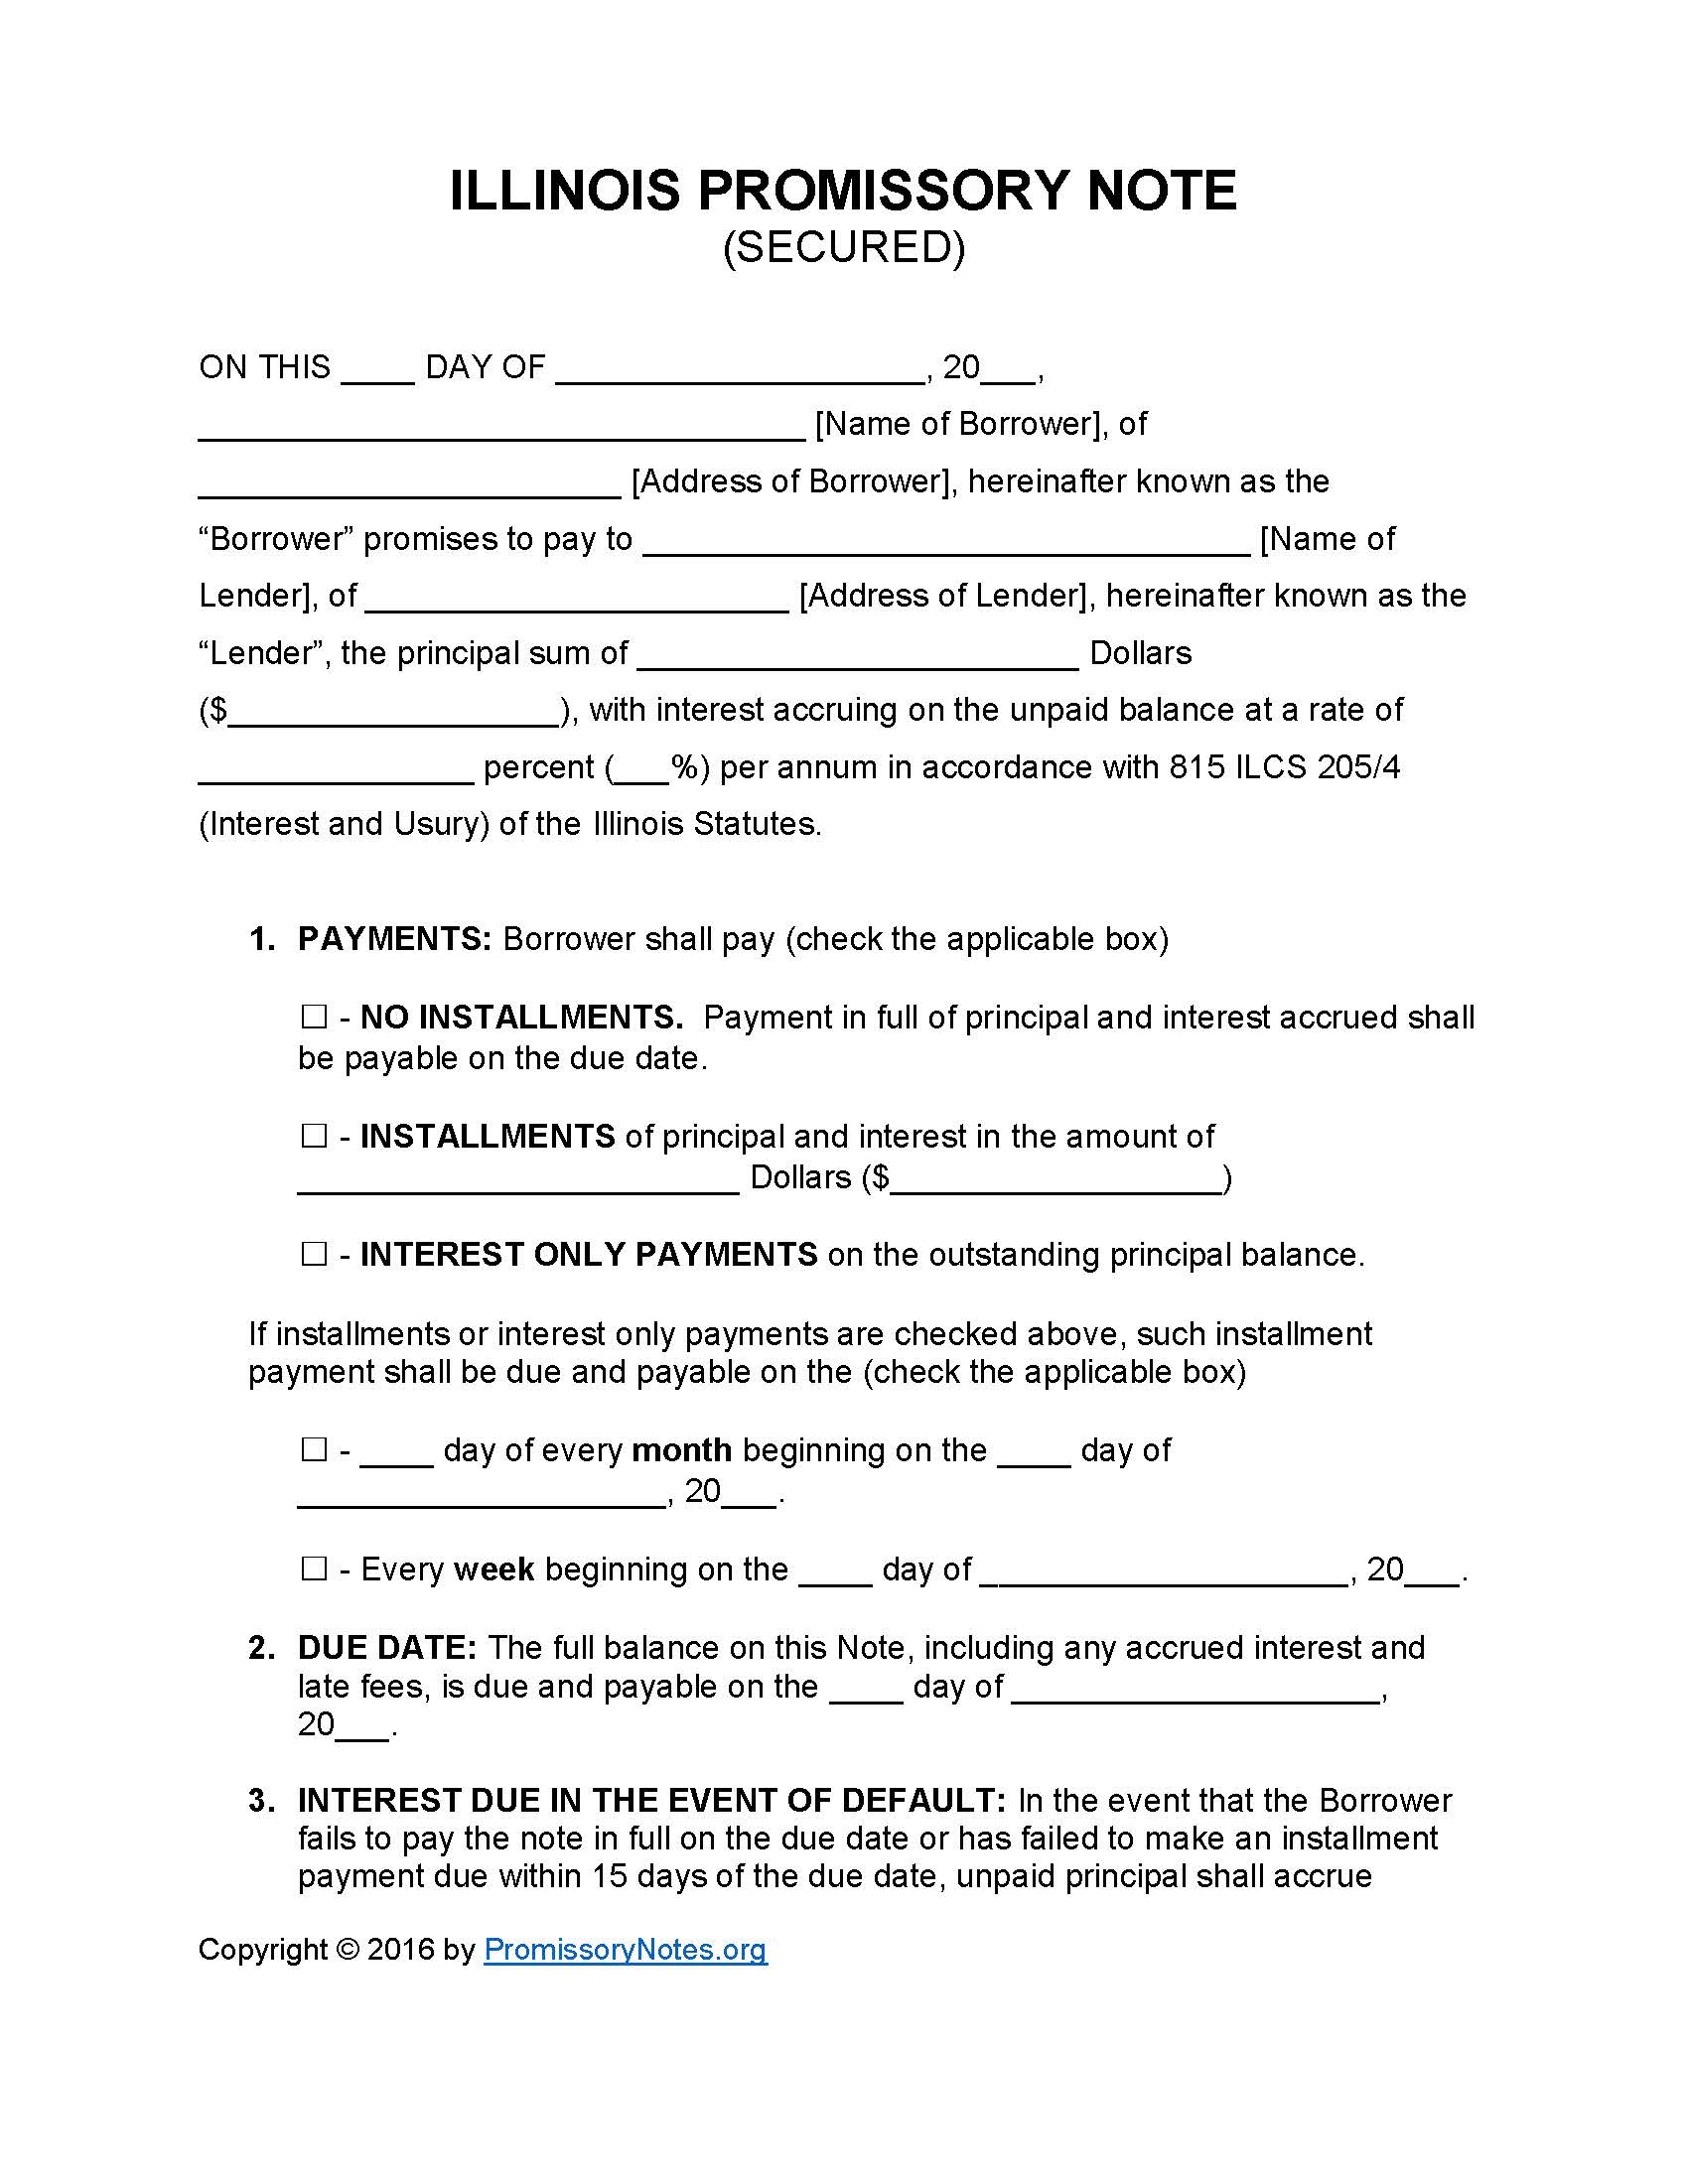 illinois-secured-promissory-note-form